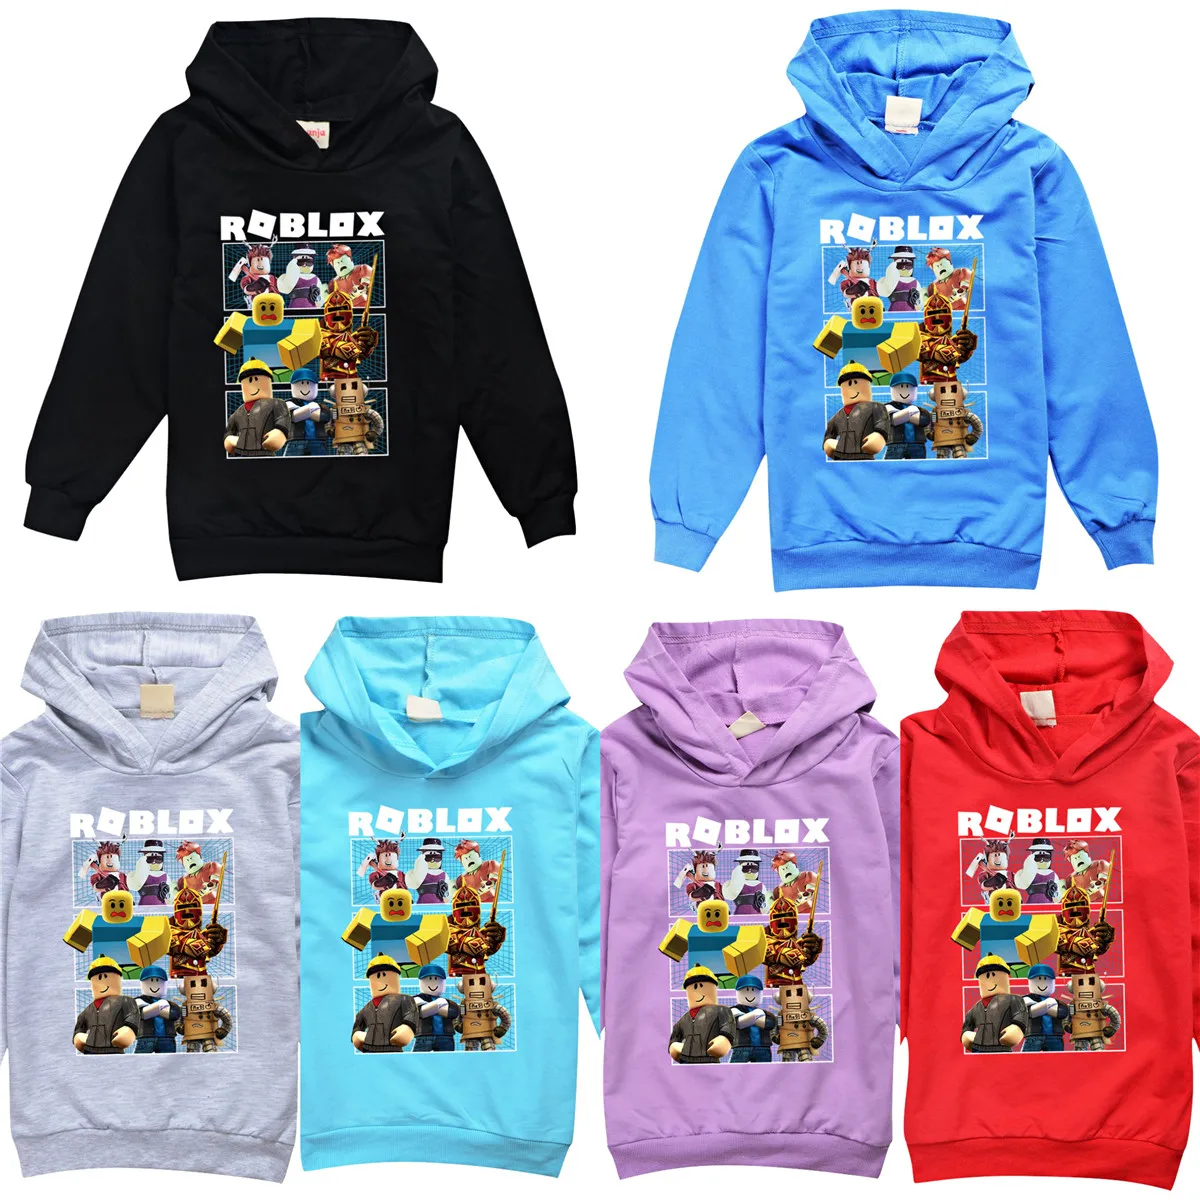 

Robloxing Neutral Kid Hoodies for Teen Girls Shirts Cotton Autumn Long Sleeve Sweater Tops Boy tshirts Clothes Birthday Gifts